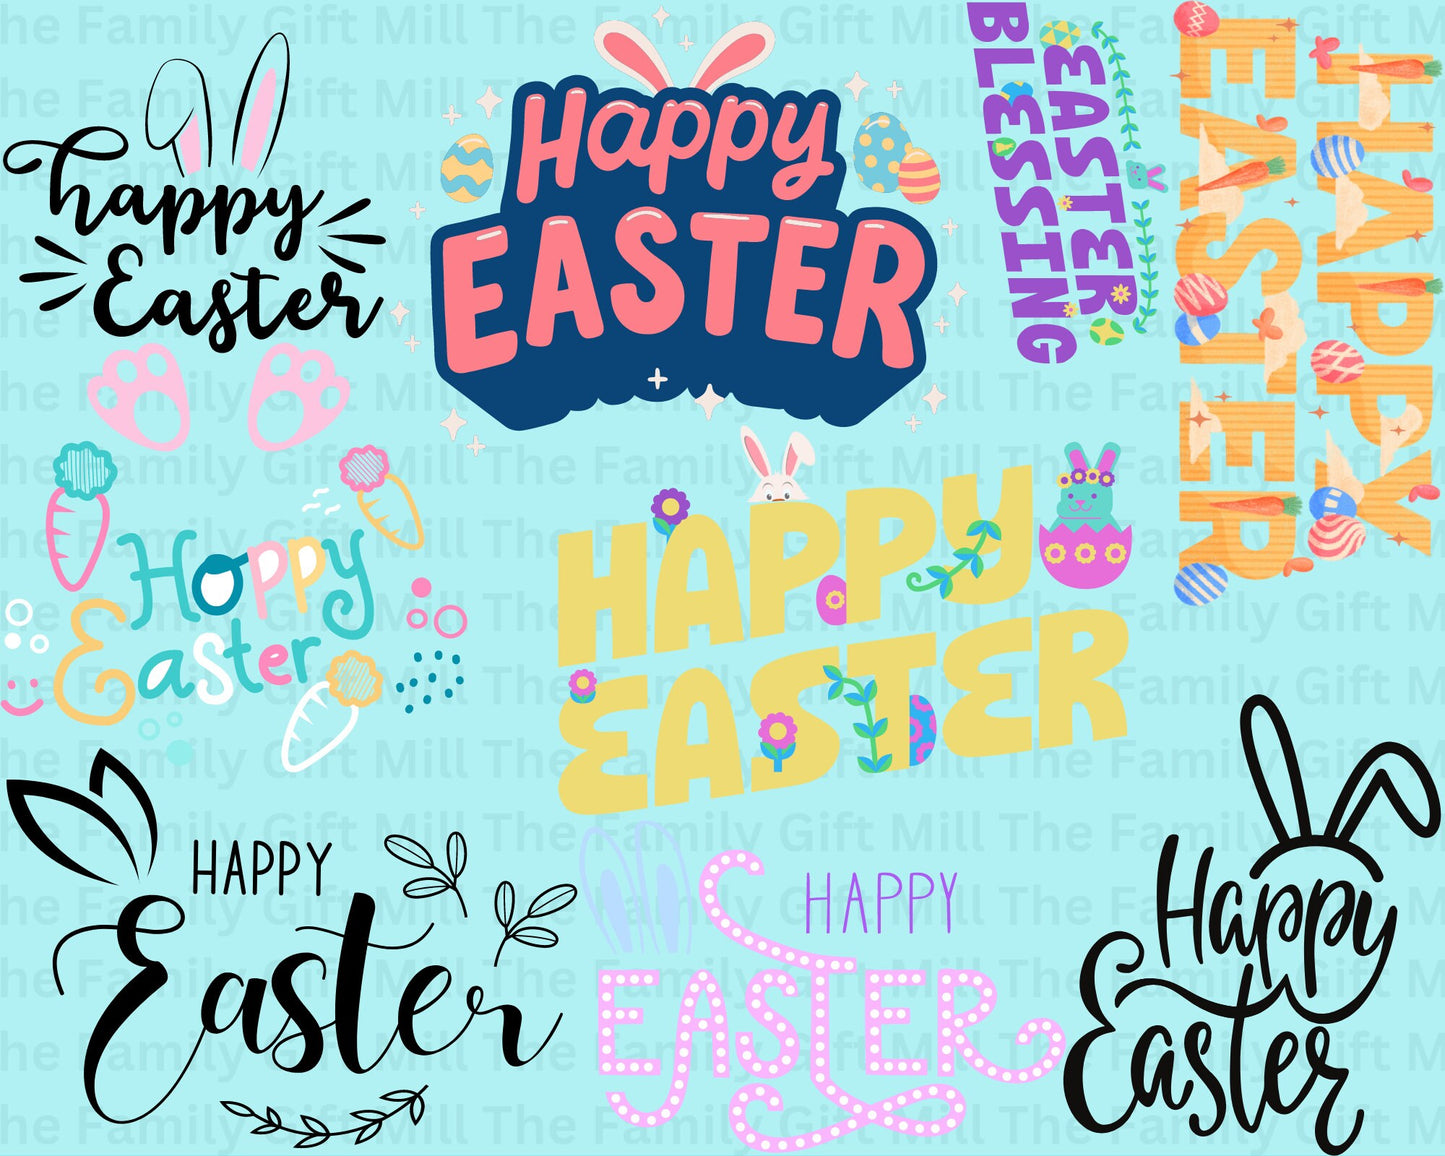 Instant Download Easter Sublimation Design: Easter Bunny, Easter Eggs, and Cute Easter Love PNGs -Easter and Happy Easter Day Available Now!